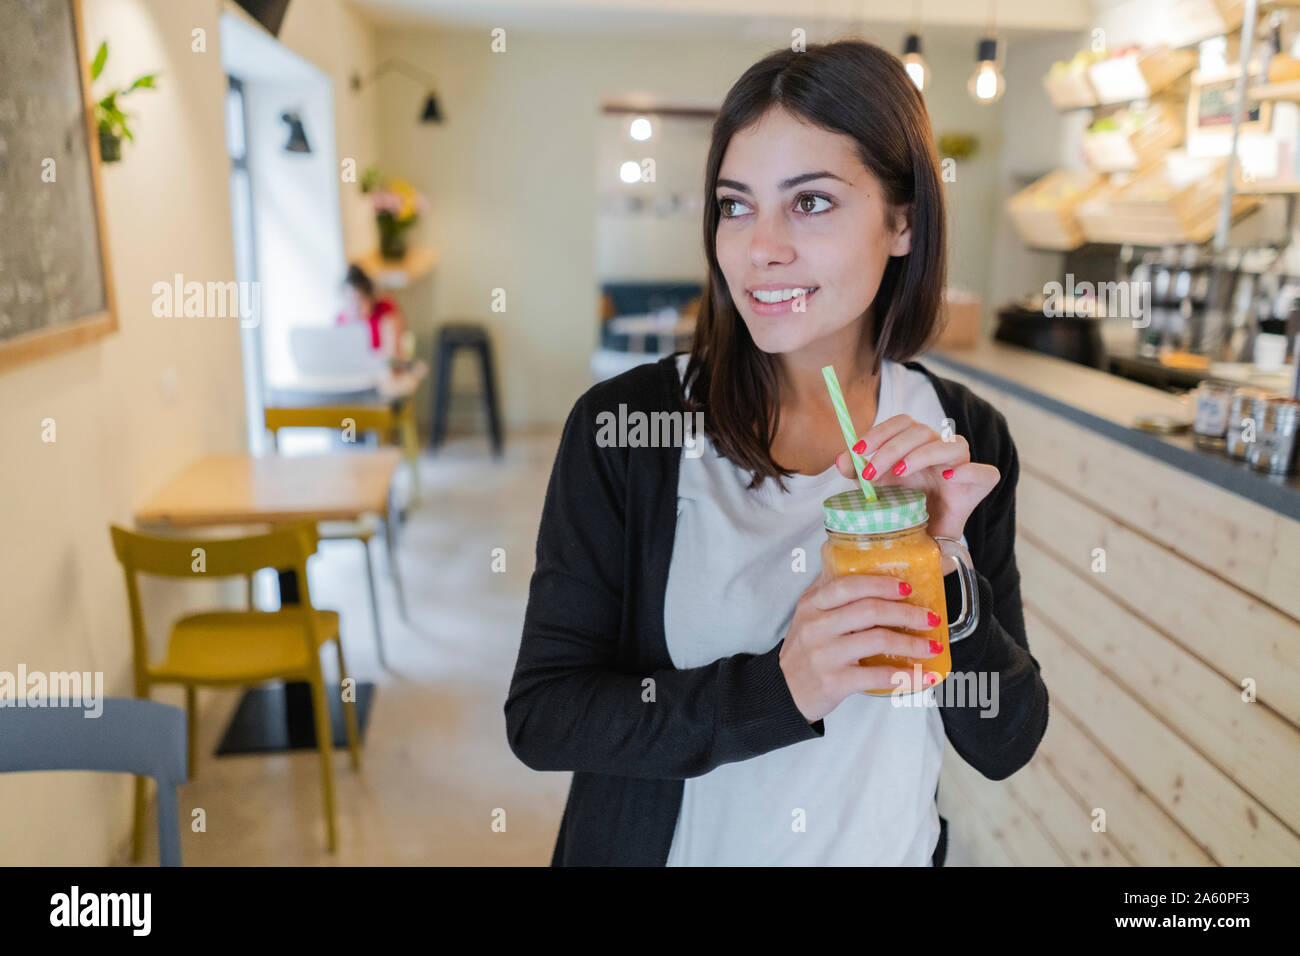 Portrait of a young woman with a smoothie in a cafe Stock Photo